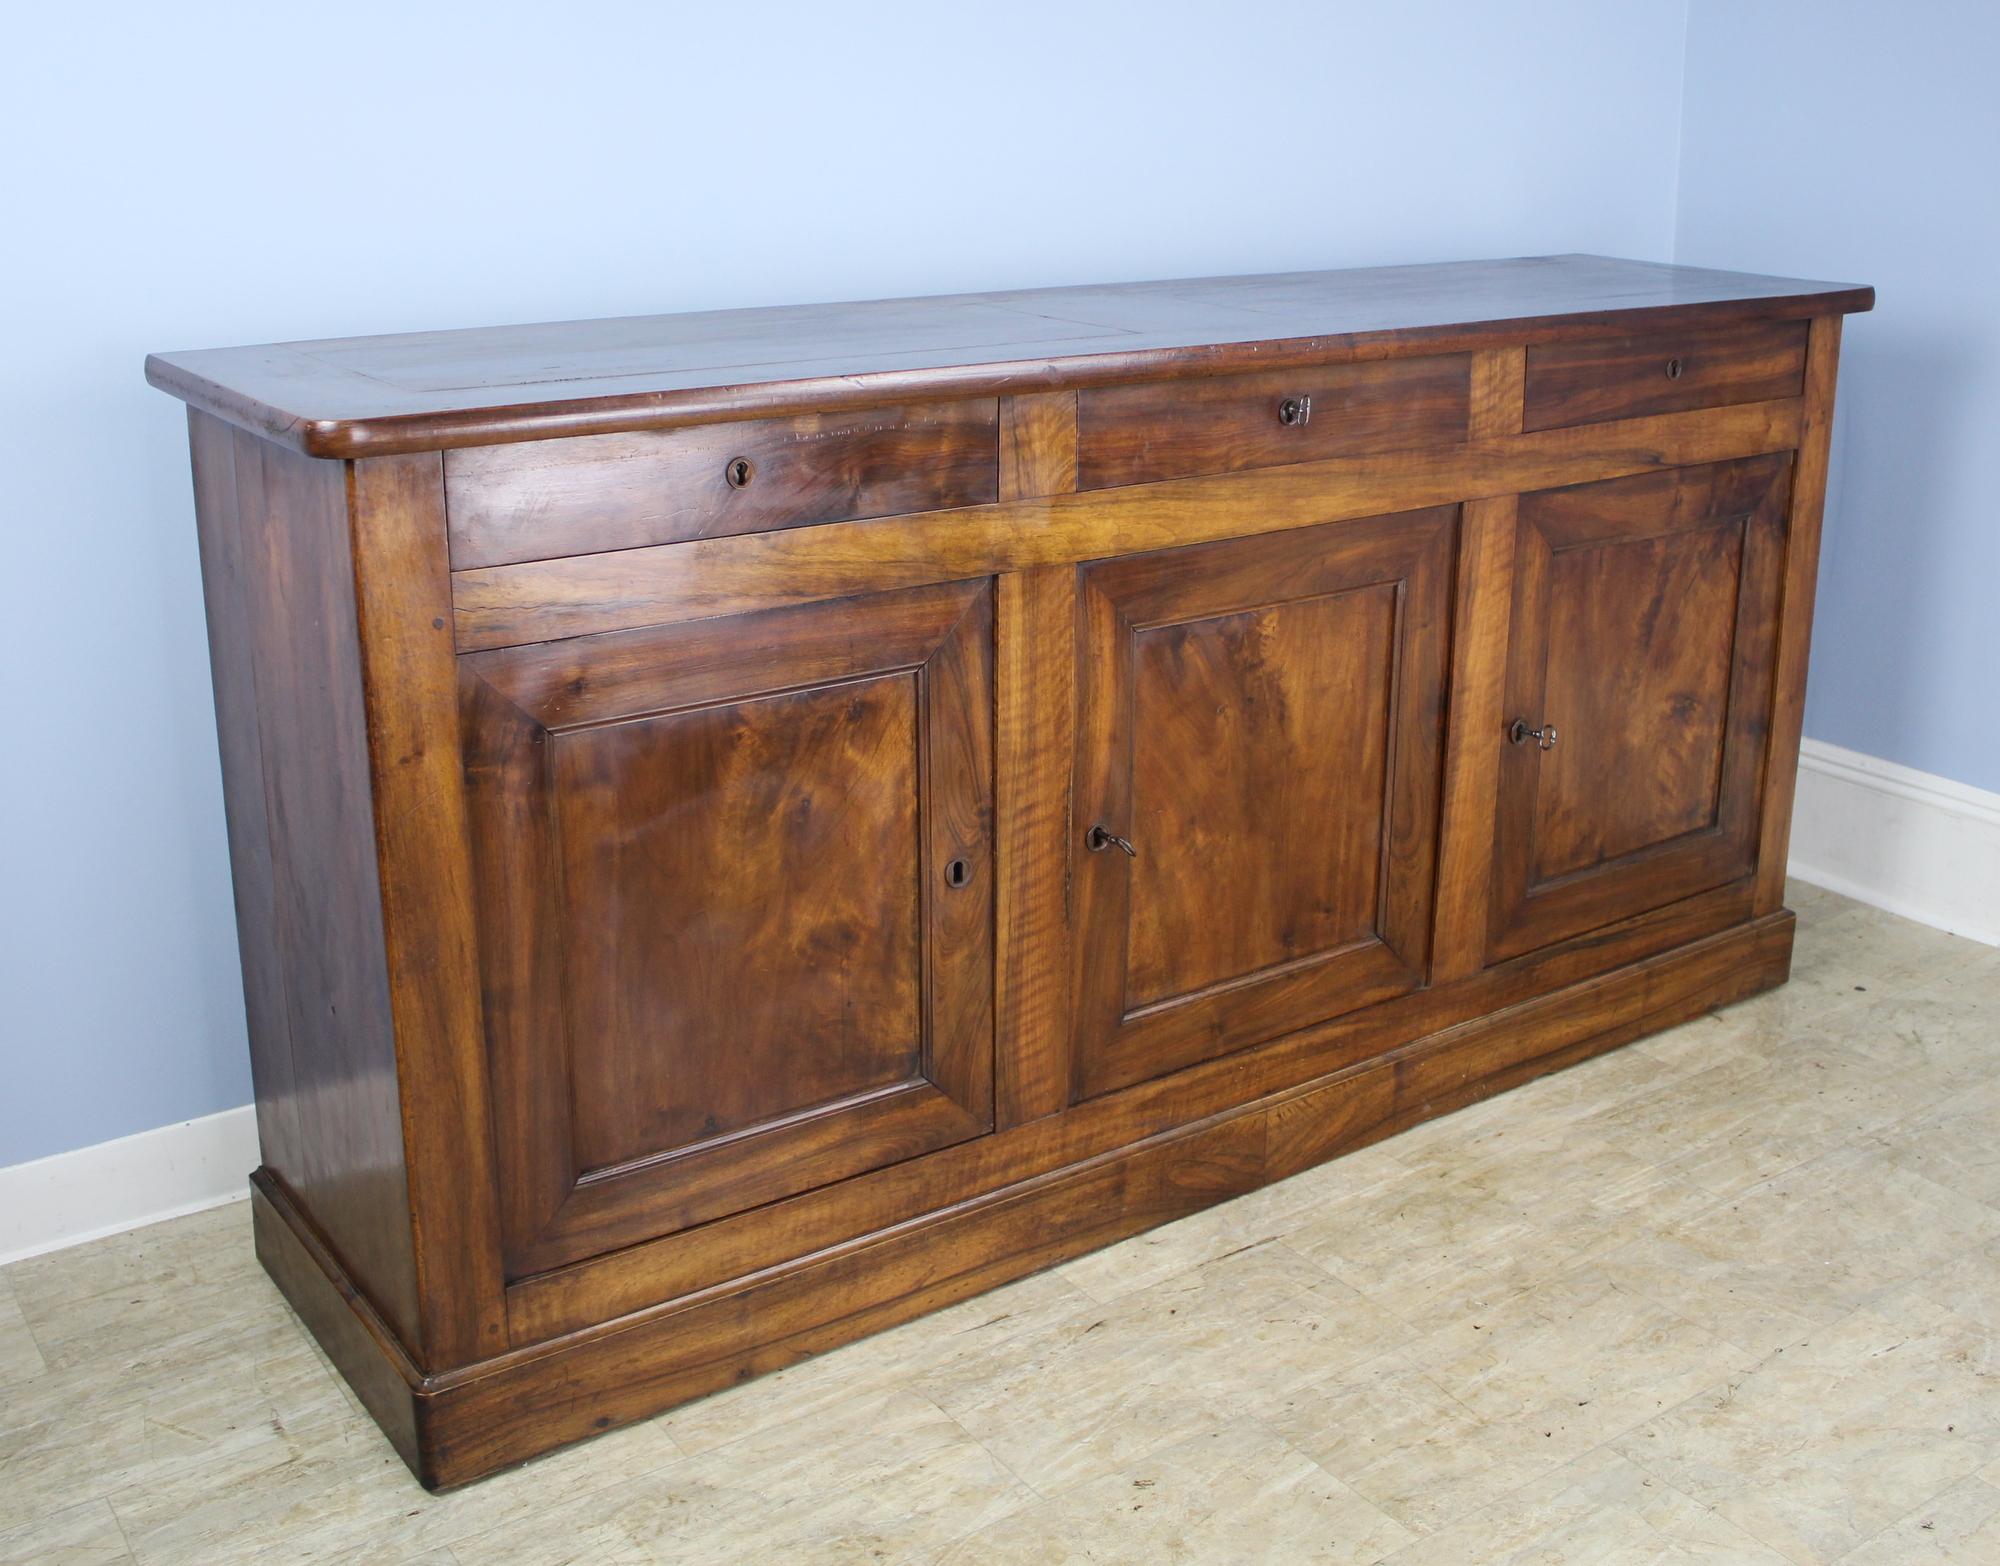 Very handsome console buffet or server, with three cupboard doors and drawers above. The walnut has the typical beautiful light and dark grain and offers a very warm and elegant look. Solid Classic plinth and inset door panels.